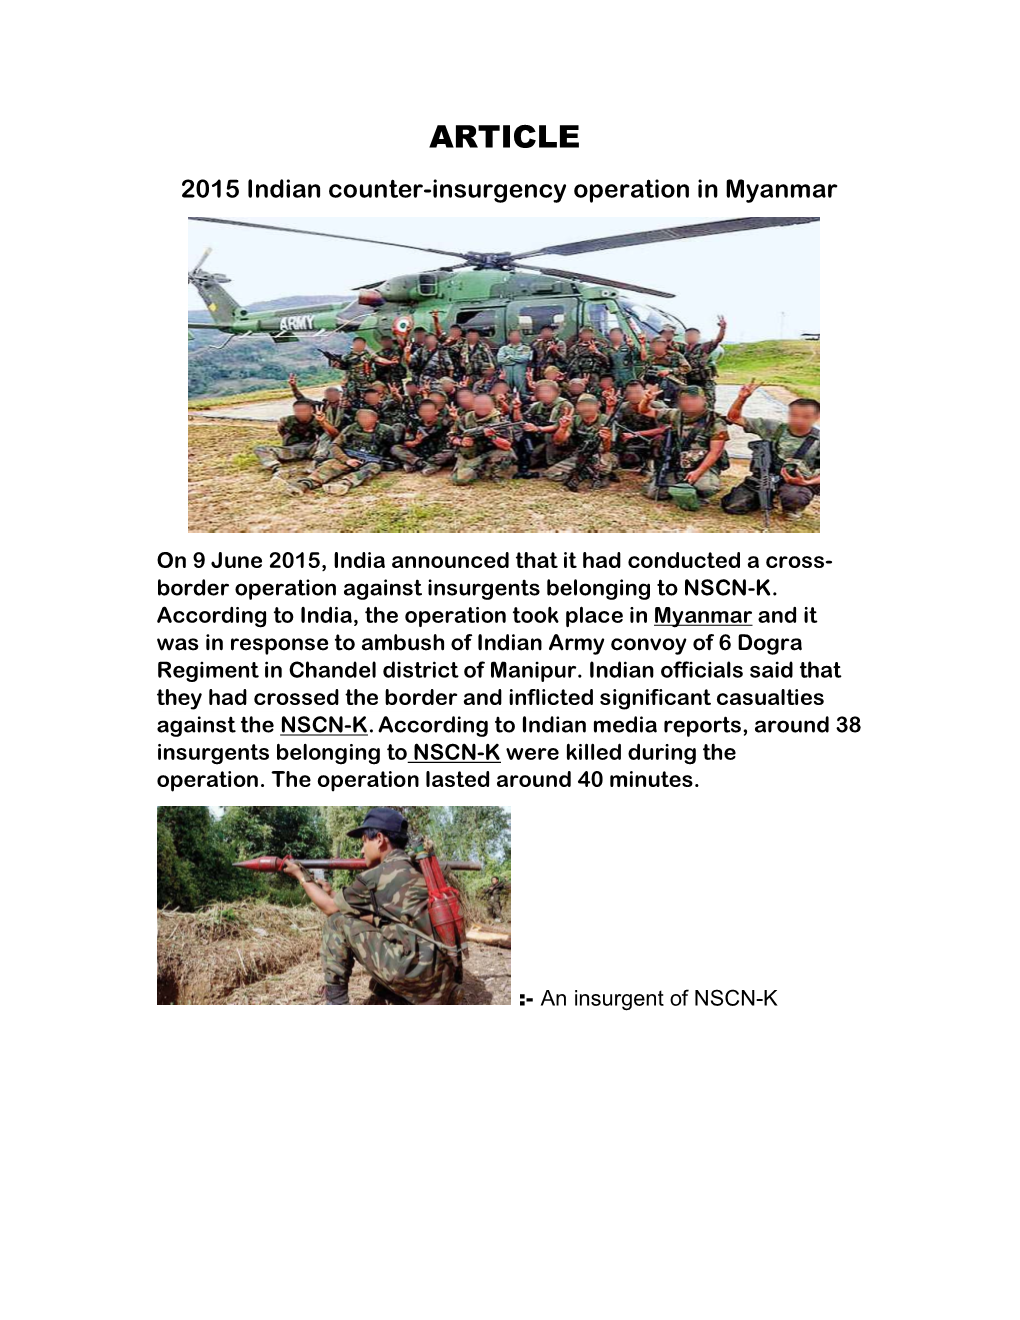 ARTICLE 2015 Indian Counter-Insurgency Operation in Myanmar